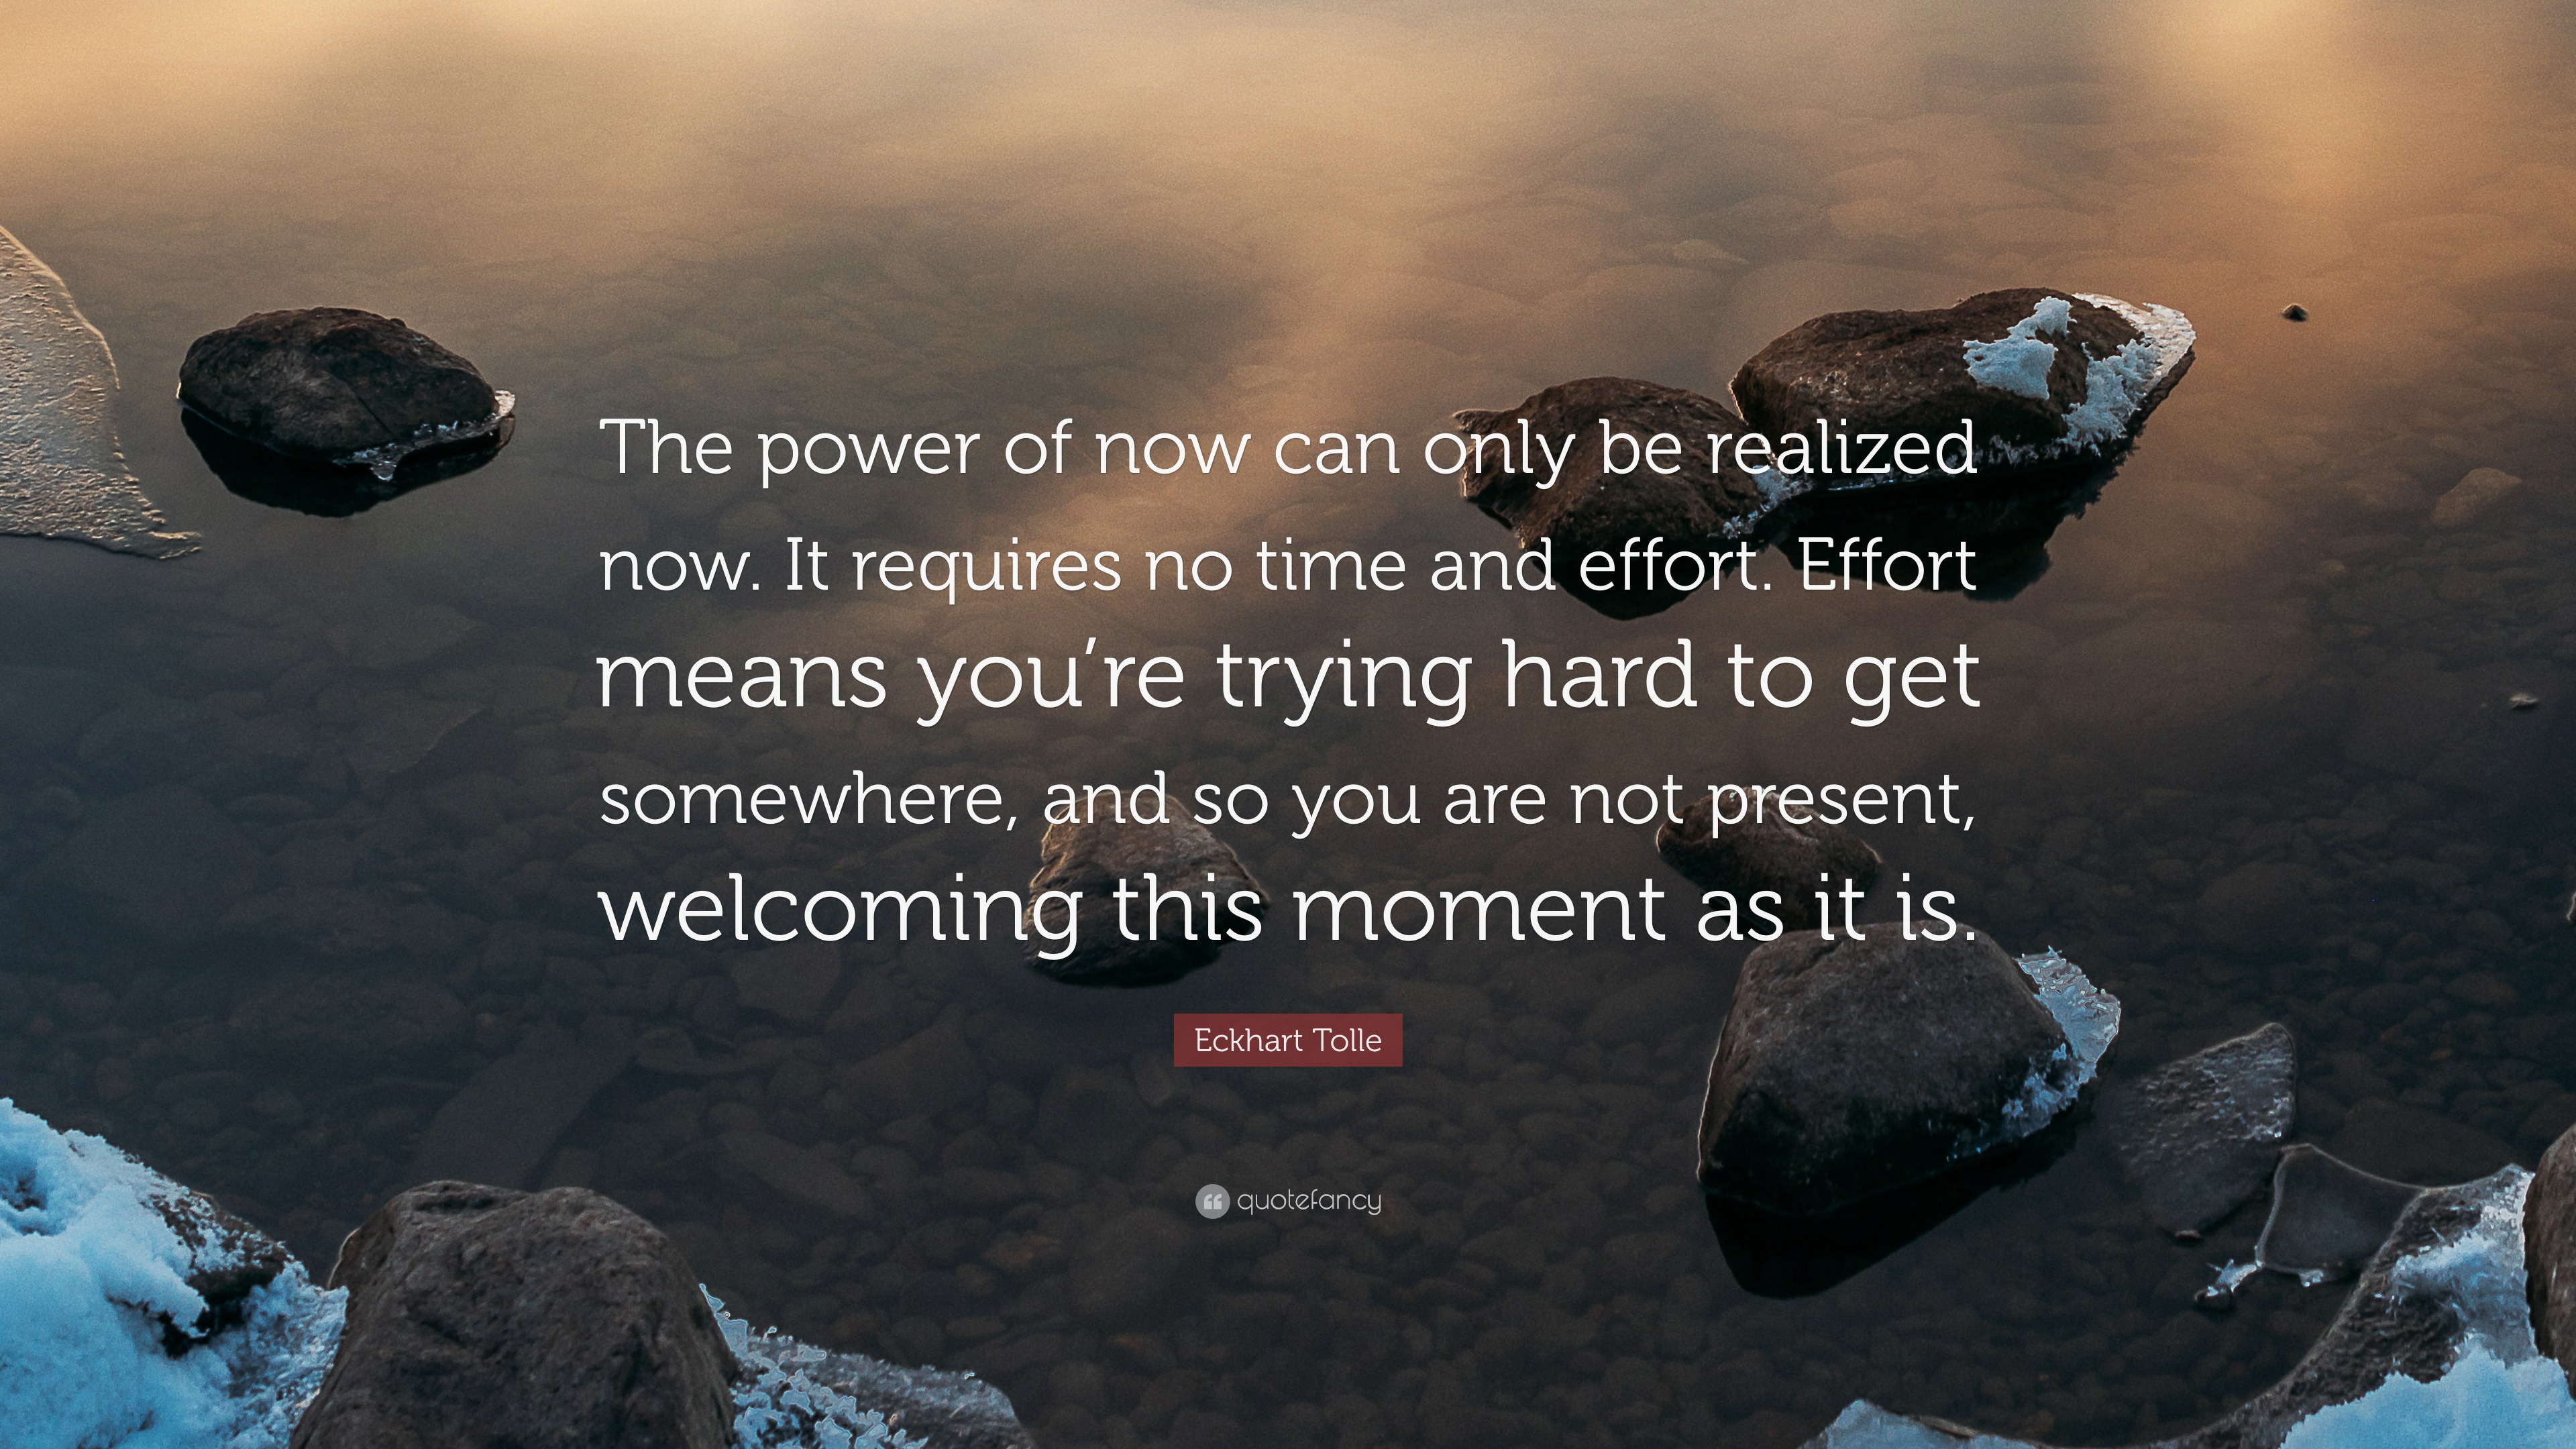 Eckhart Tolle Quote: “The power of now can only be realized now. It